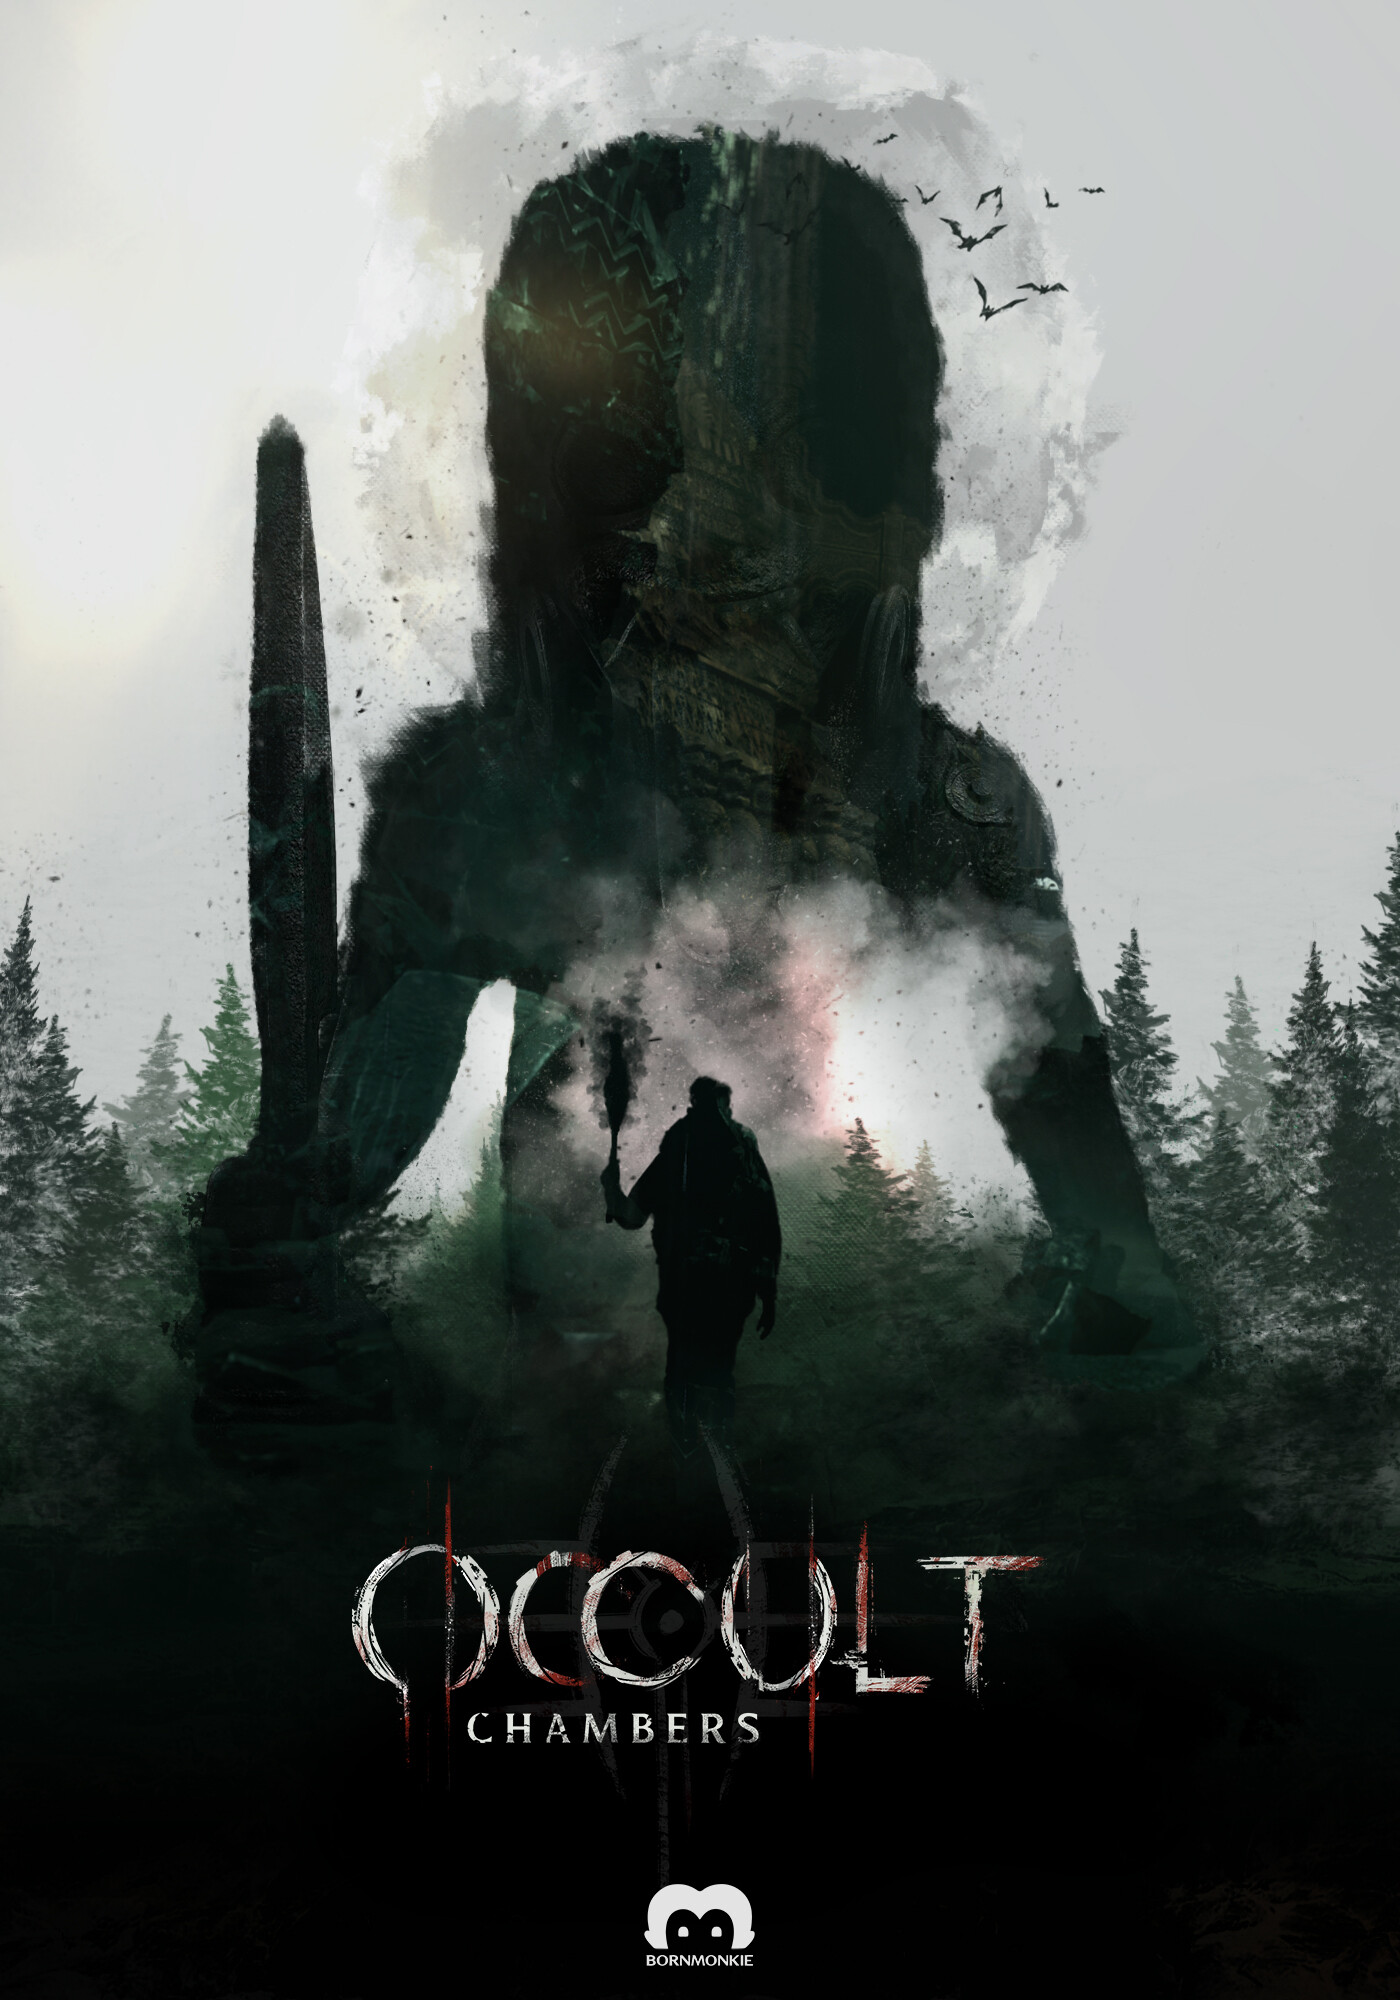 ArtStation - Occult Chambers Poster Works